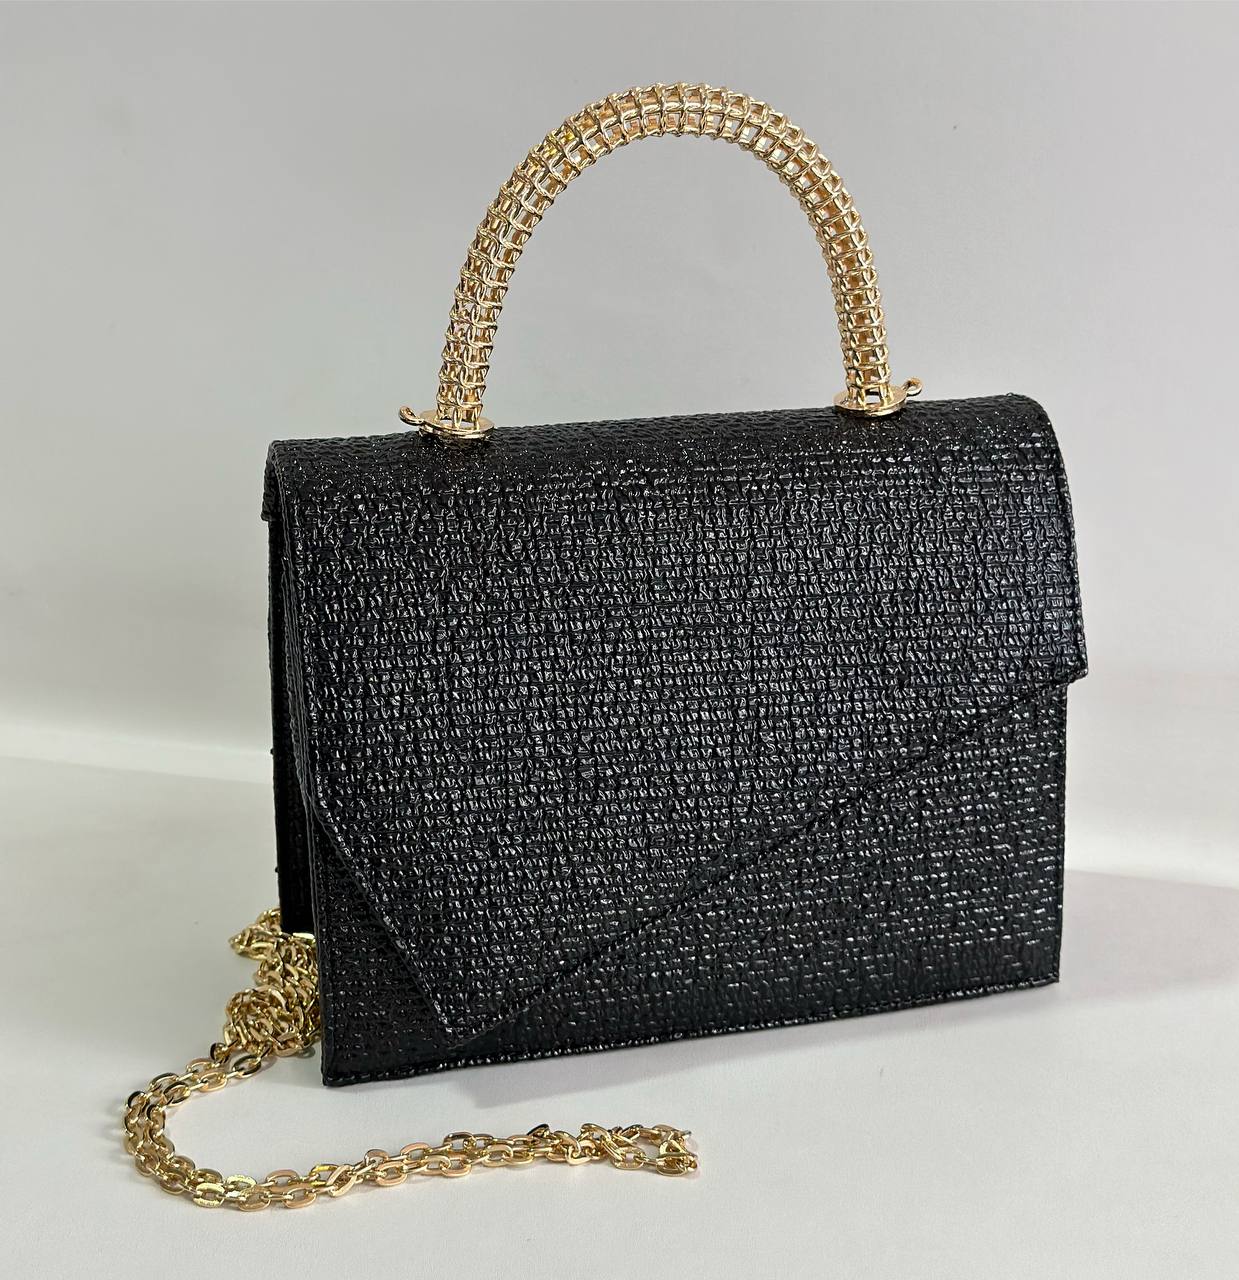 Small evening bag for women - Gold handle